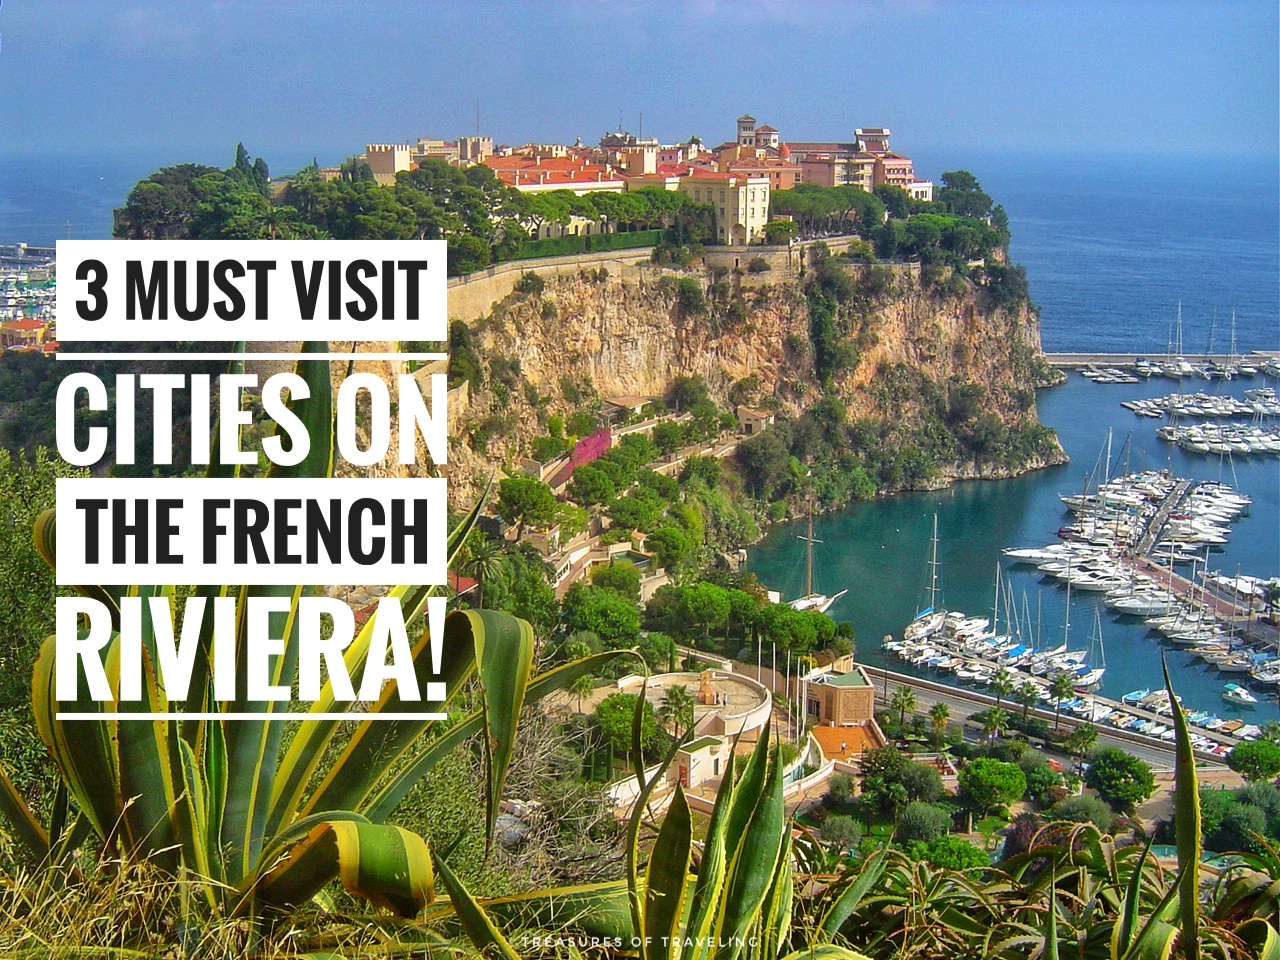 The French Riviera: 3 Must Visit Cities on the Côte d’Azur!